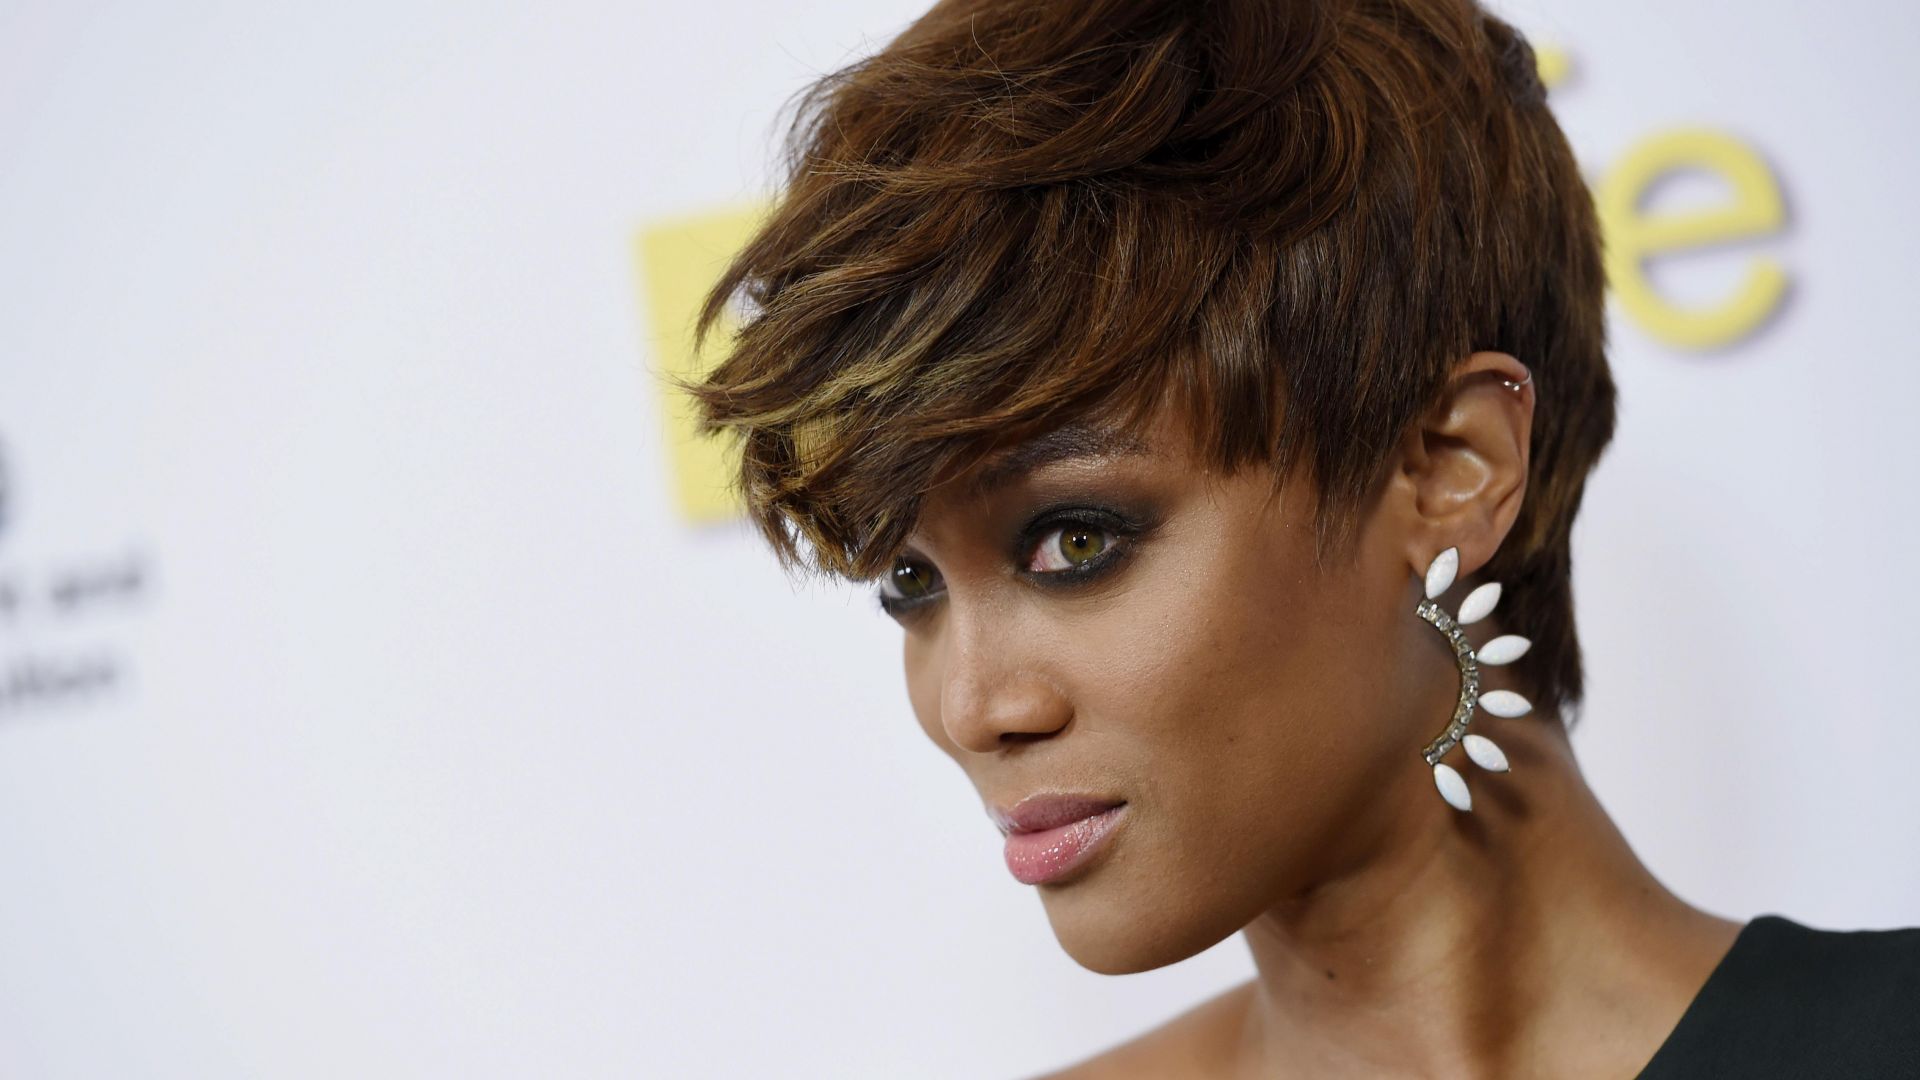 Tyra Banks, Victoria's Secret Angel, girl, hair, beads, television personality, talk show host, producer, author, actress, former model (horizontal)